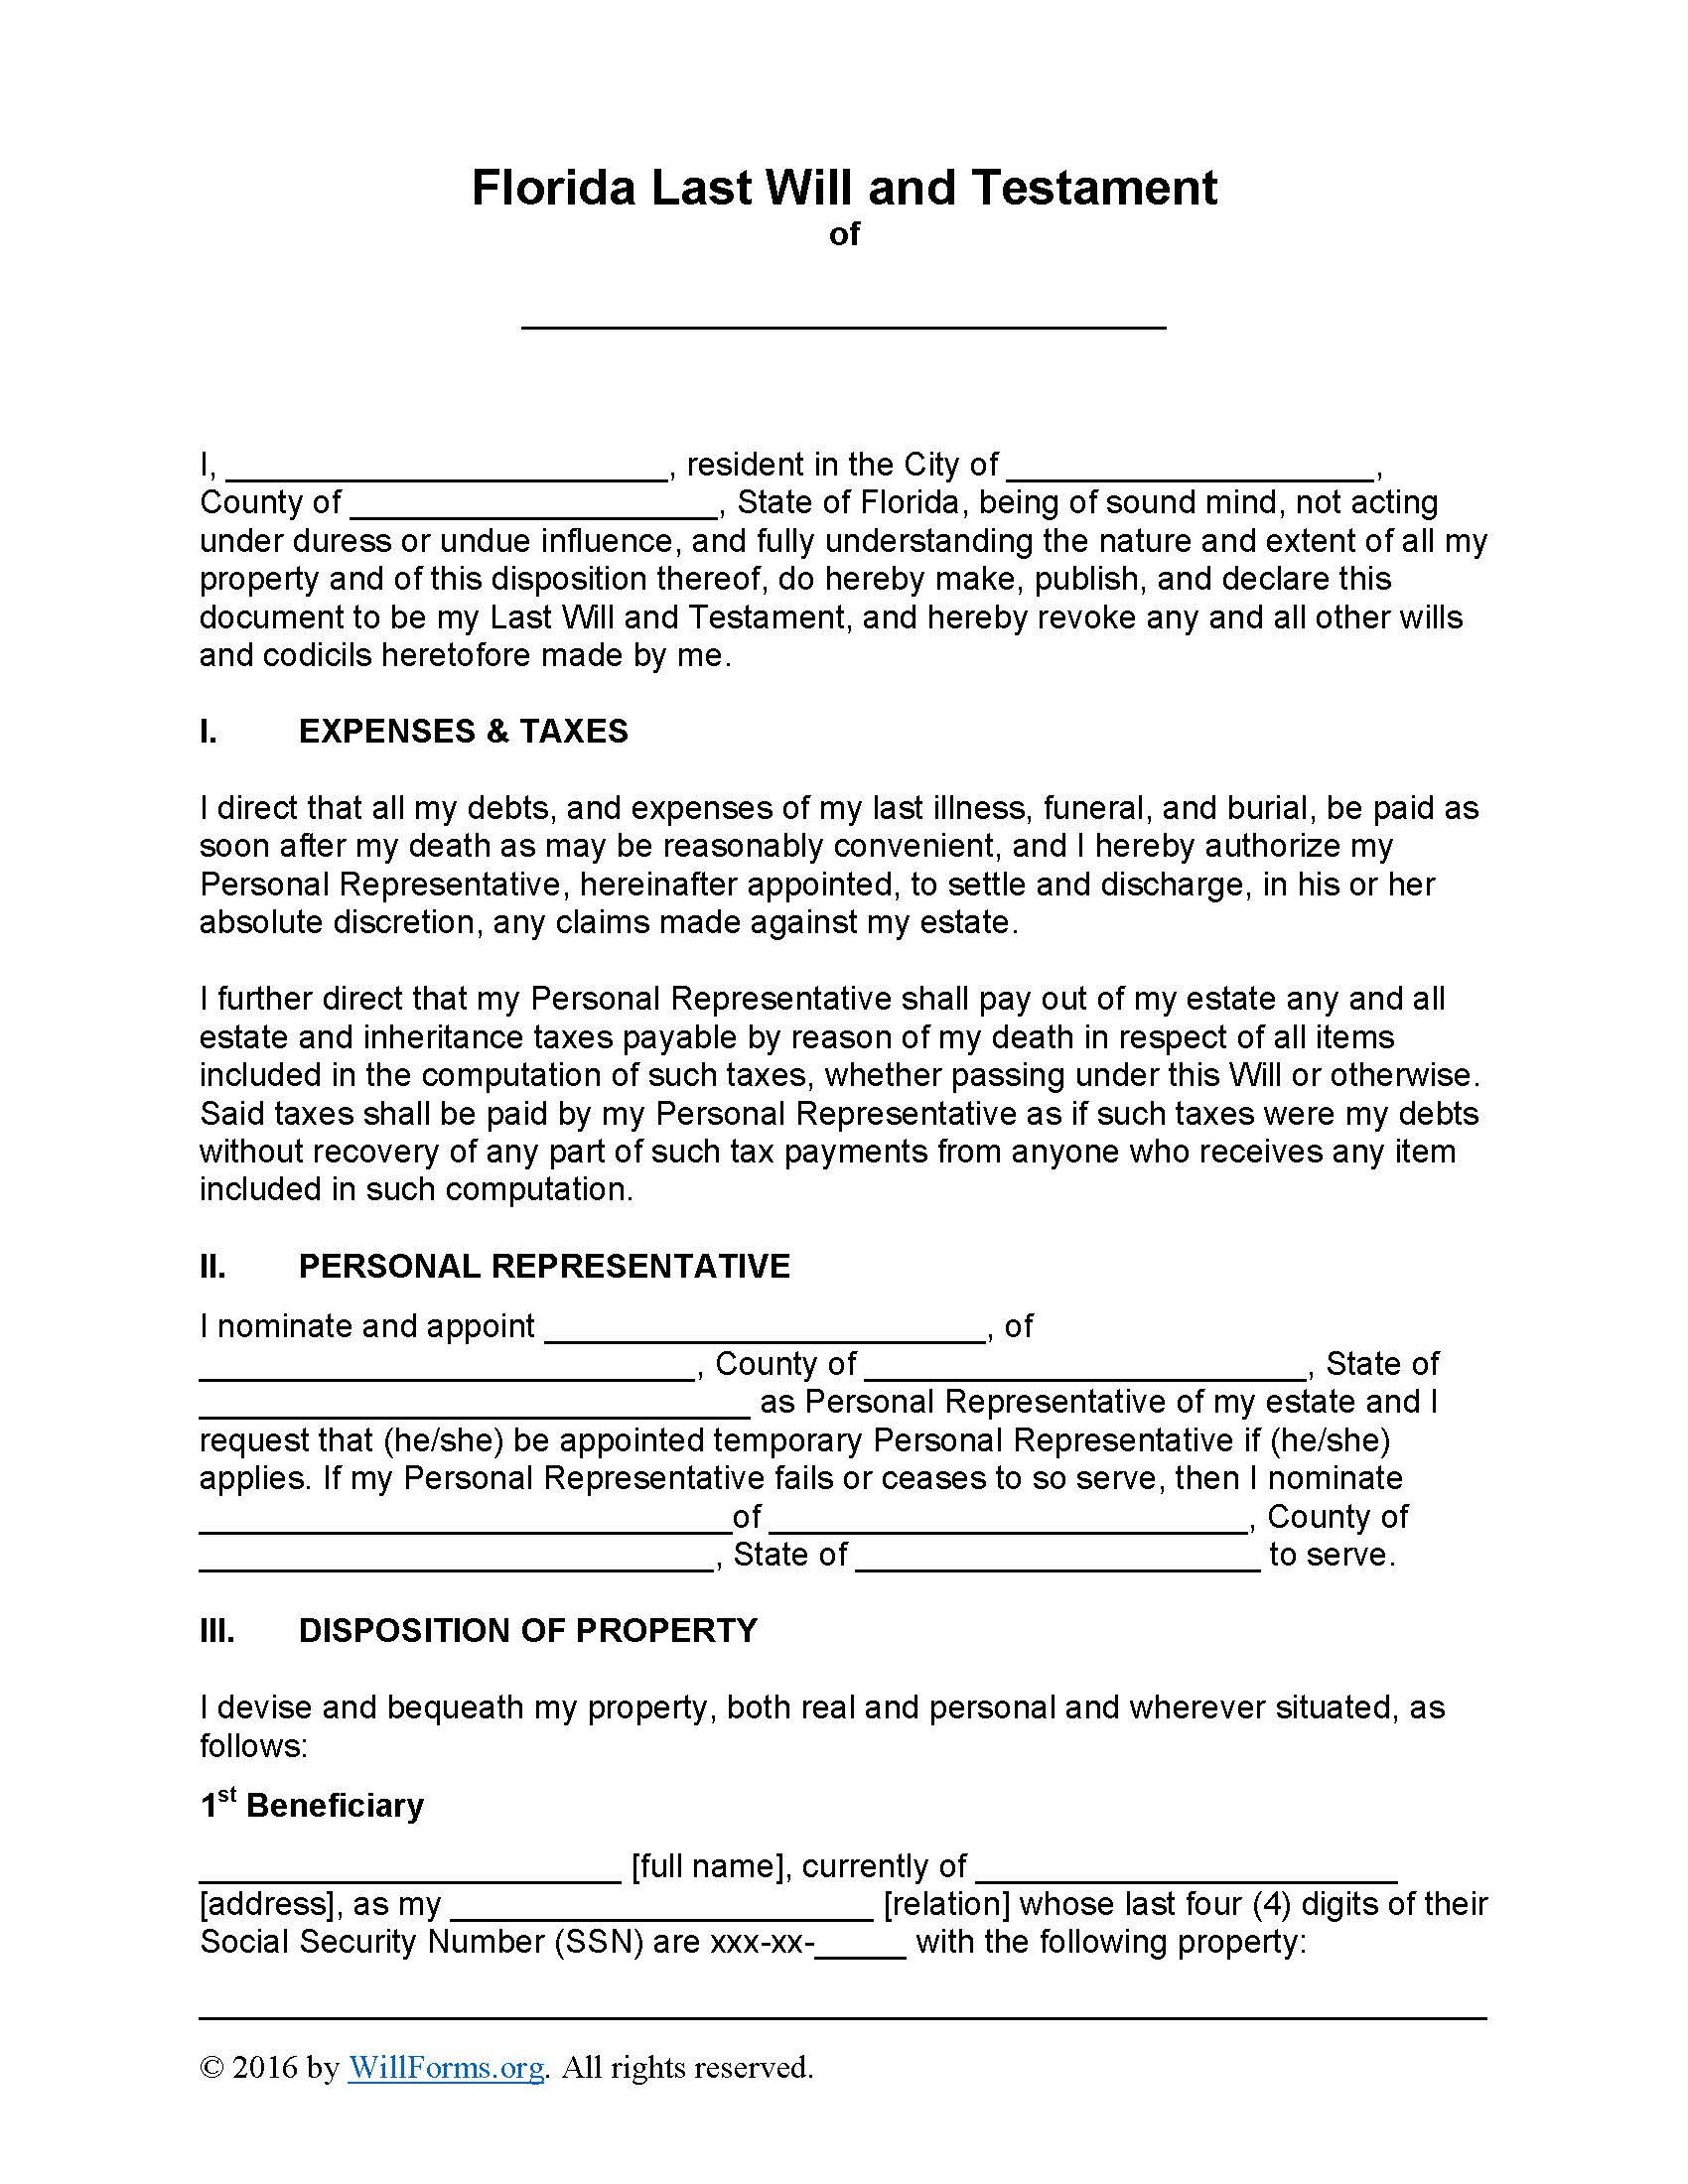 Florida Last Will and Testament Form